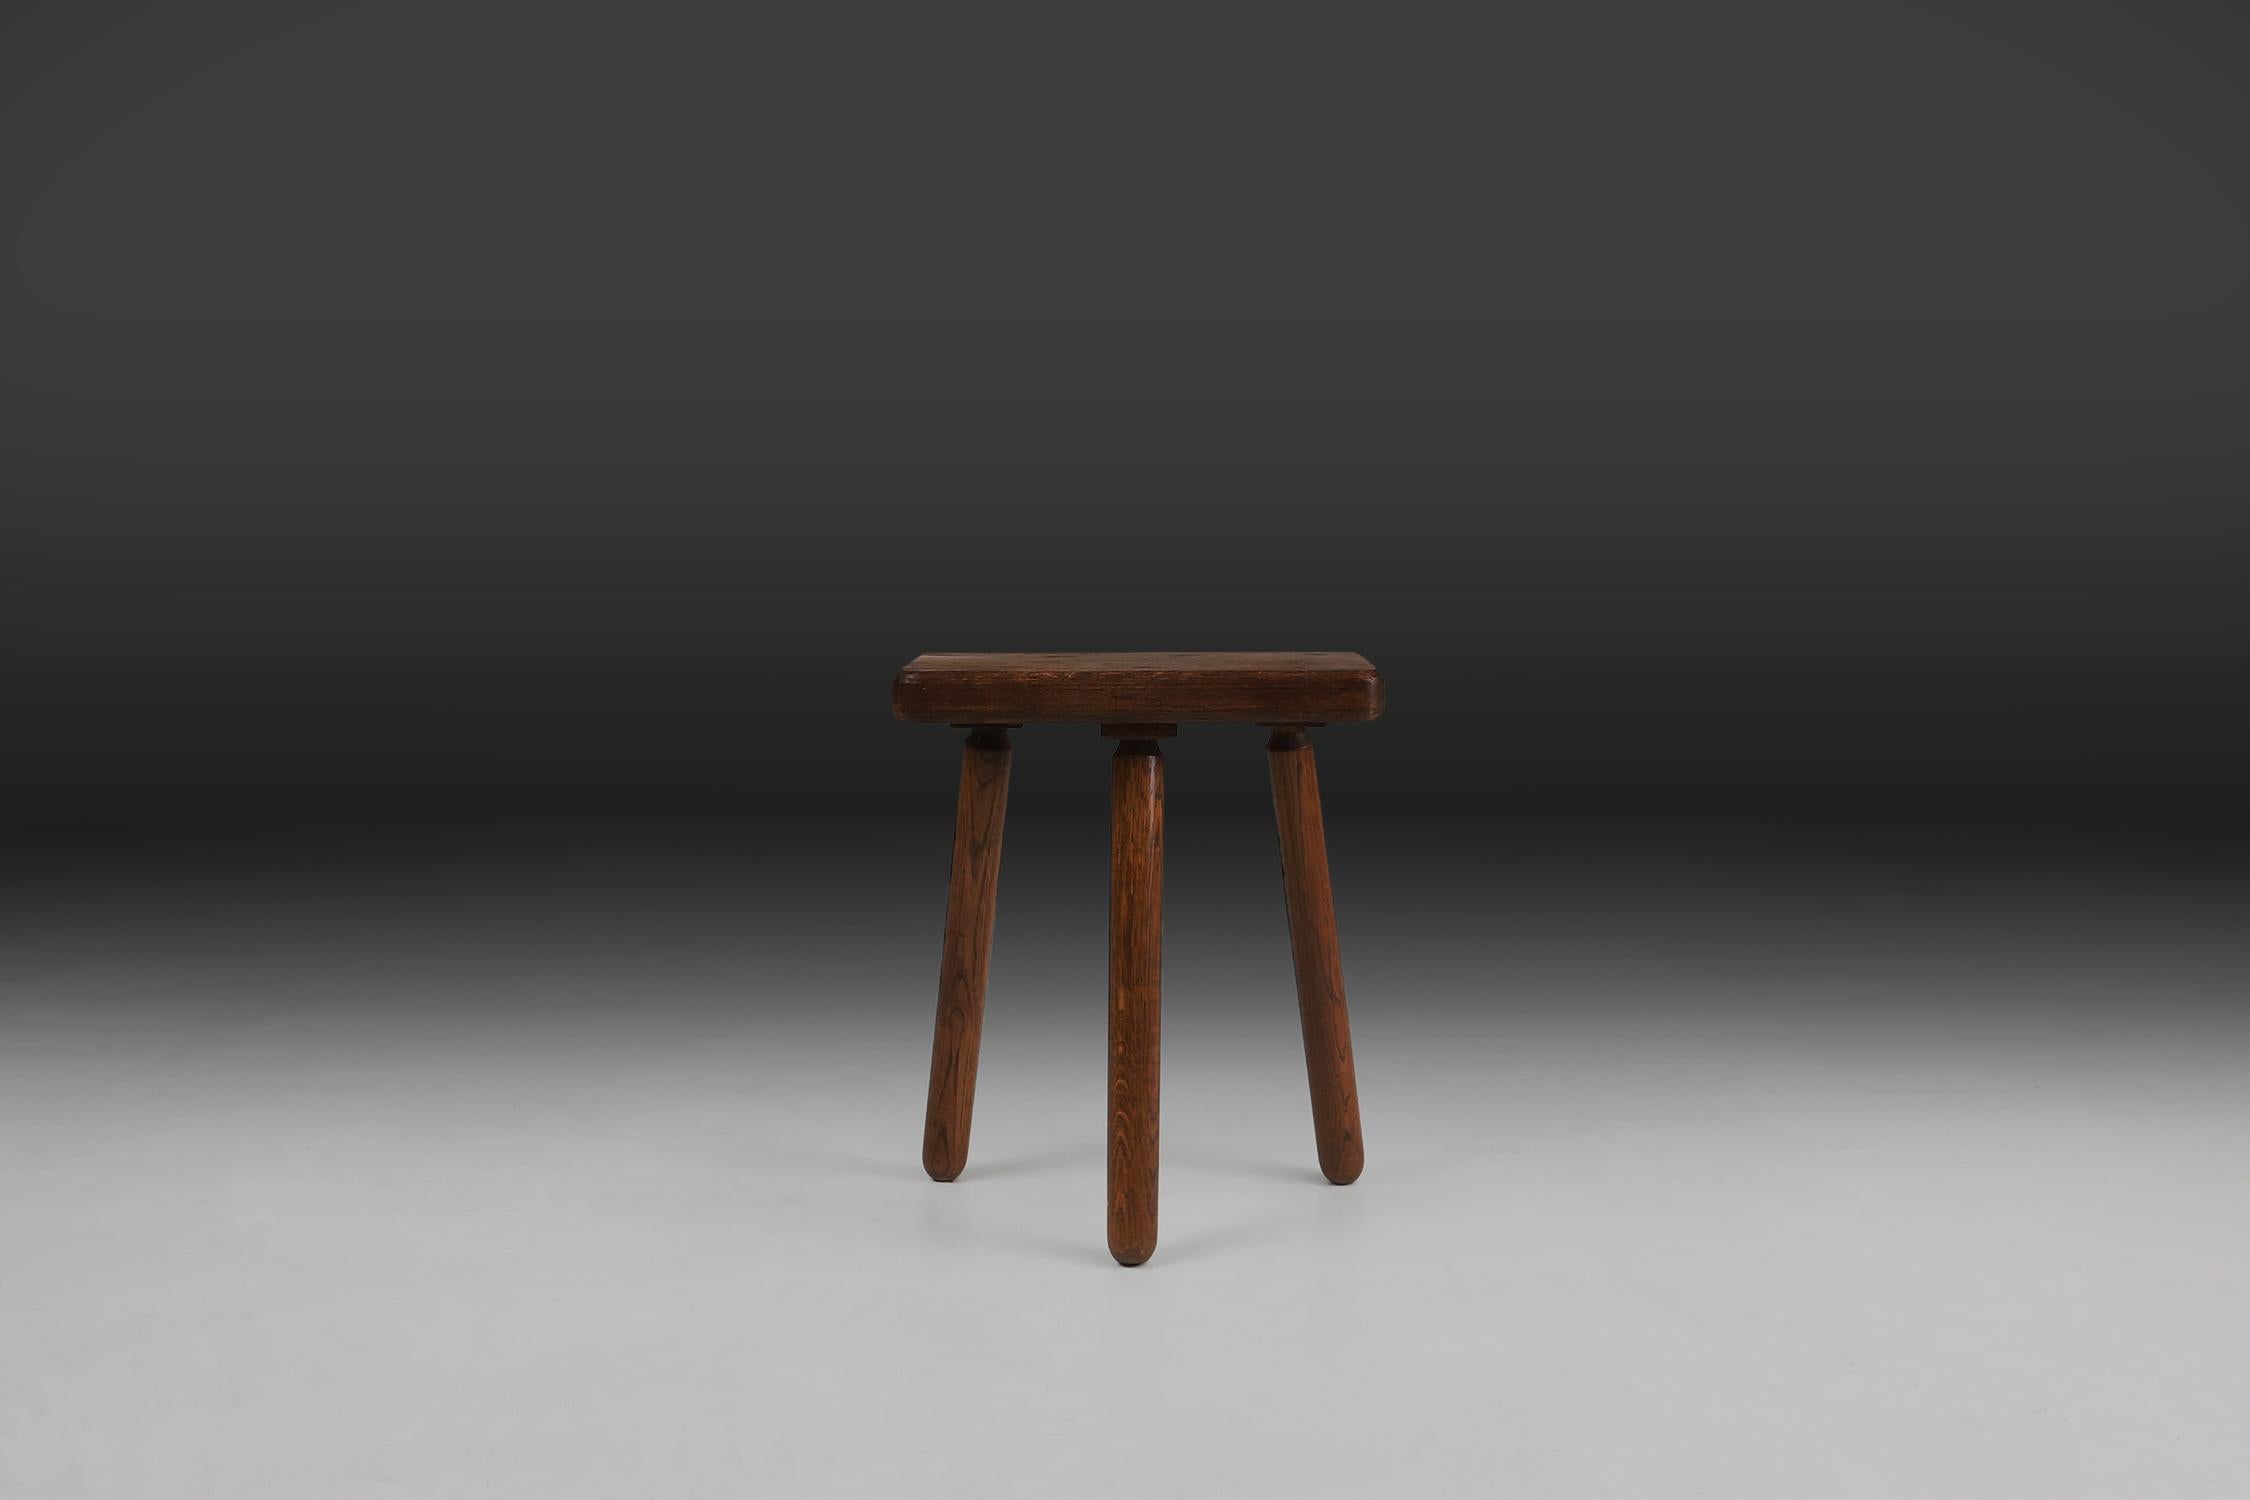 a unique and authentic French stool made in the 1940s.

Made of full wood, this stool exudes warmth and durability. The rich brown colour, enhanced by a natural patina, gives the wood character and tells a story of decades.

The stool has three